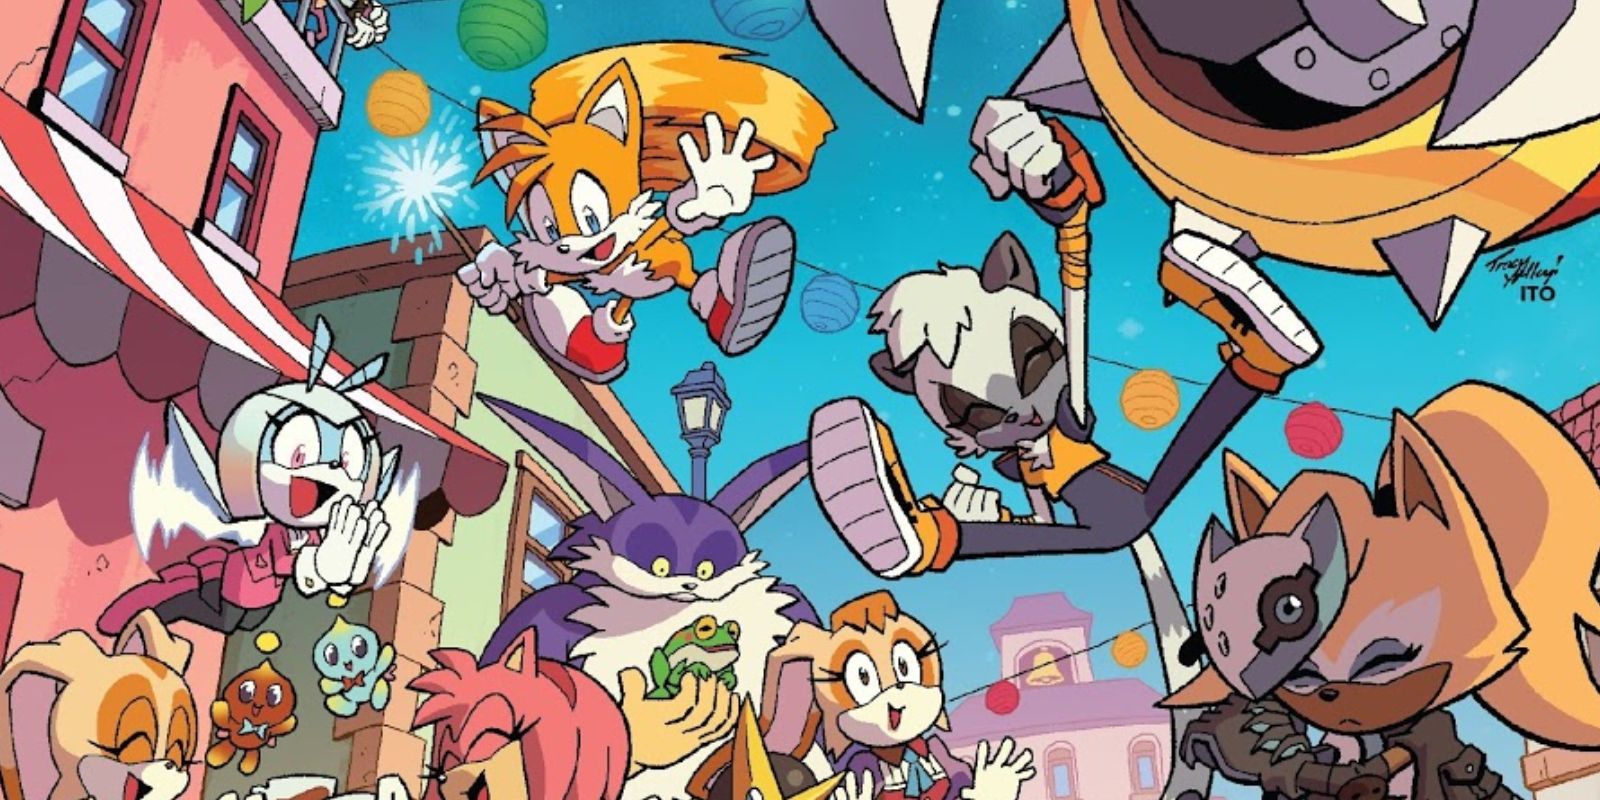 Sonic The Hedgehog #42 Covers - Tails' Channel